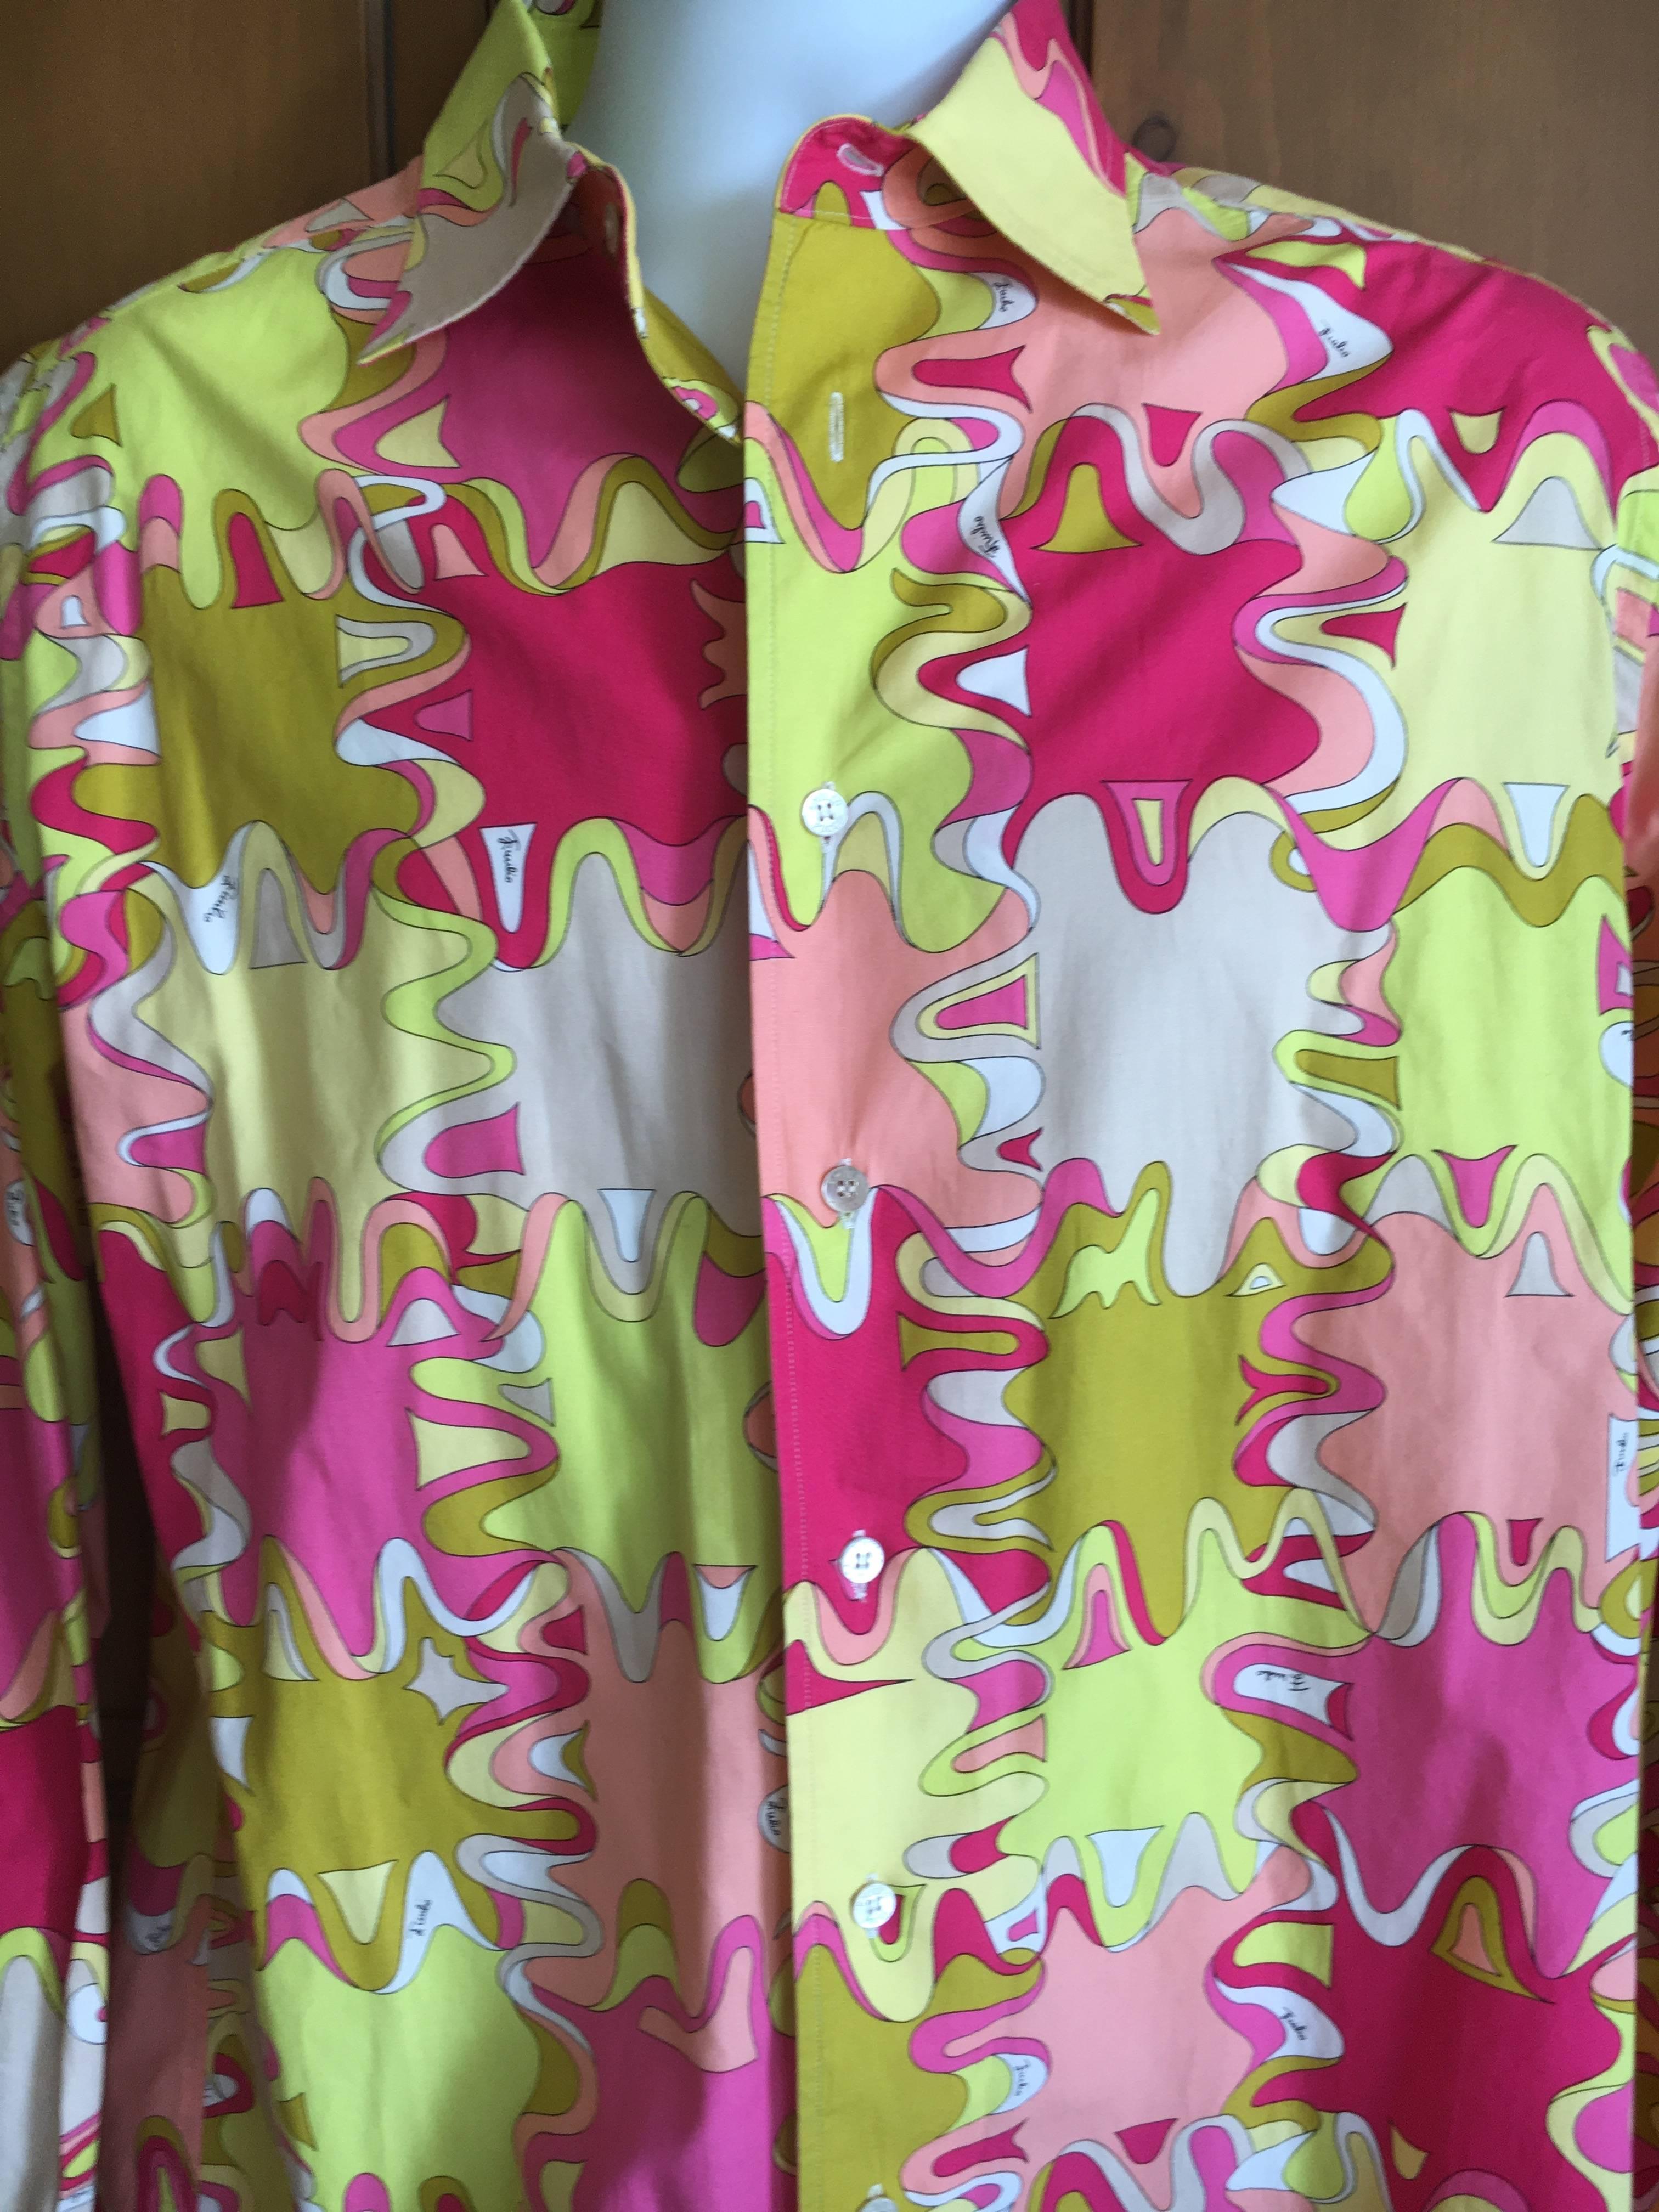 Wonderful yellow and pink cotton button up shirt from Emilio Pucci.
Size XL, this fit's a man 42-44
Chest 46"
Waist 44"
Length 33"